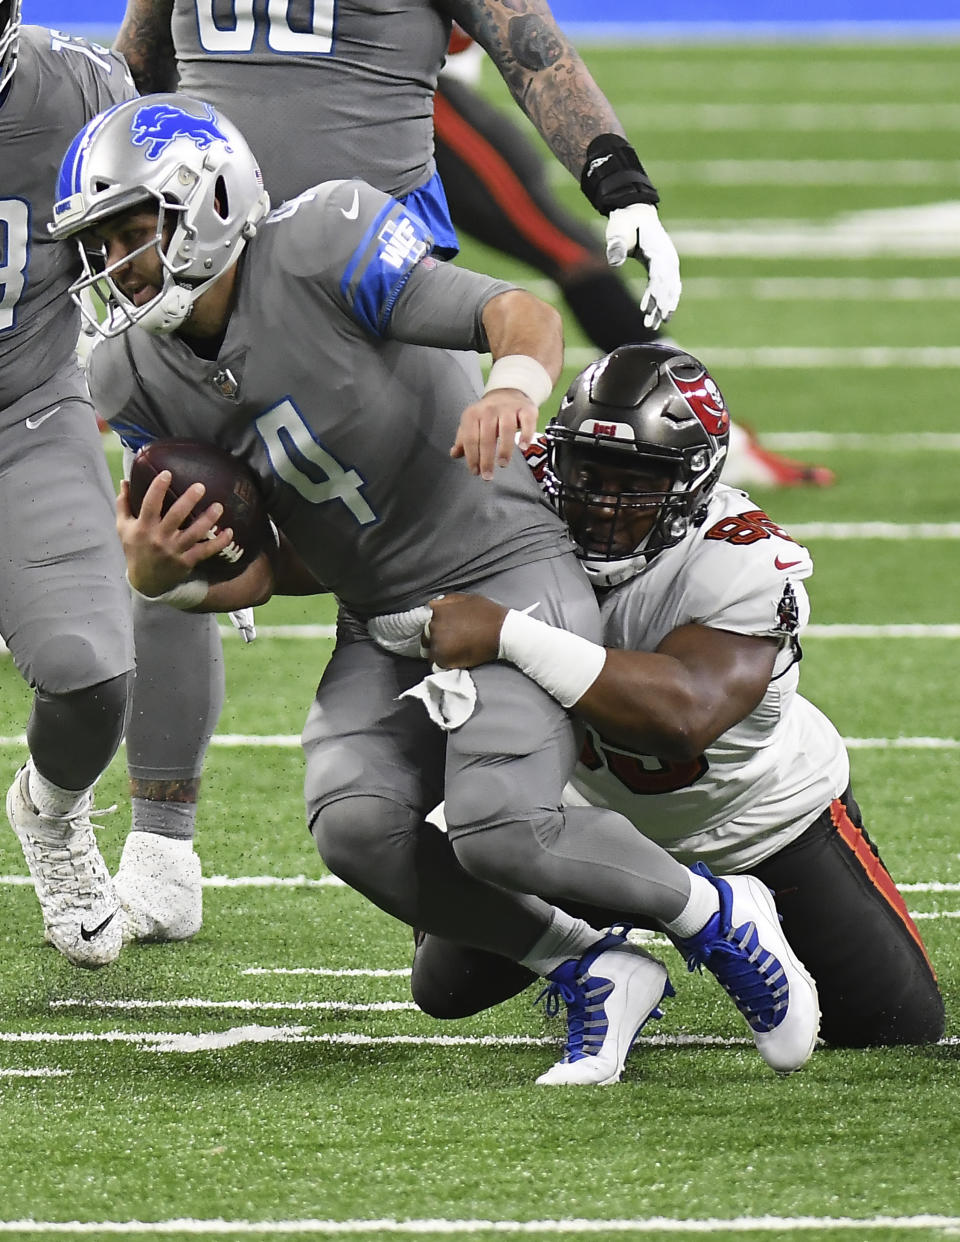 Detroit Lions quarterback Chase Daniel (4) is sacked by Tampa Bay Buccaneers' Jaydon Mickens (85)during the first half of an NFL football game, Saturday, Dec. 26, 2020, in Detroit. (AP Photo/Lon Horwedel)